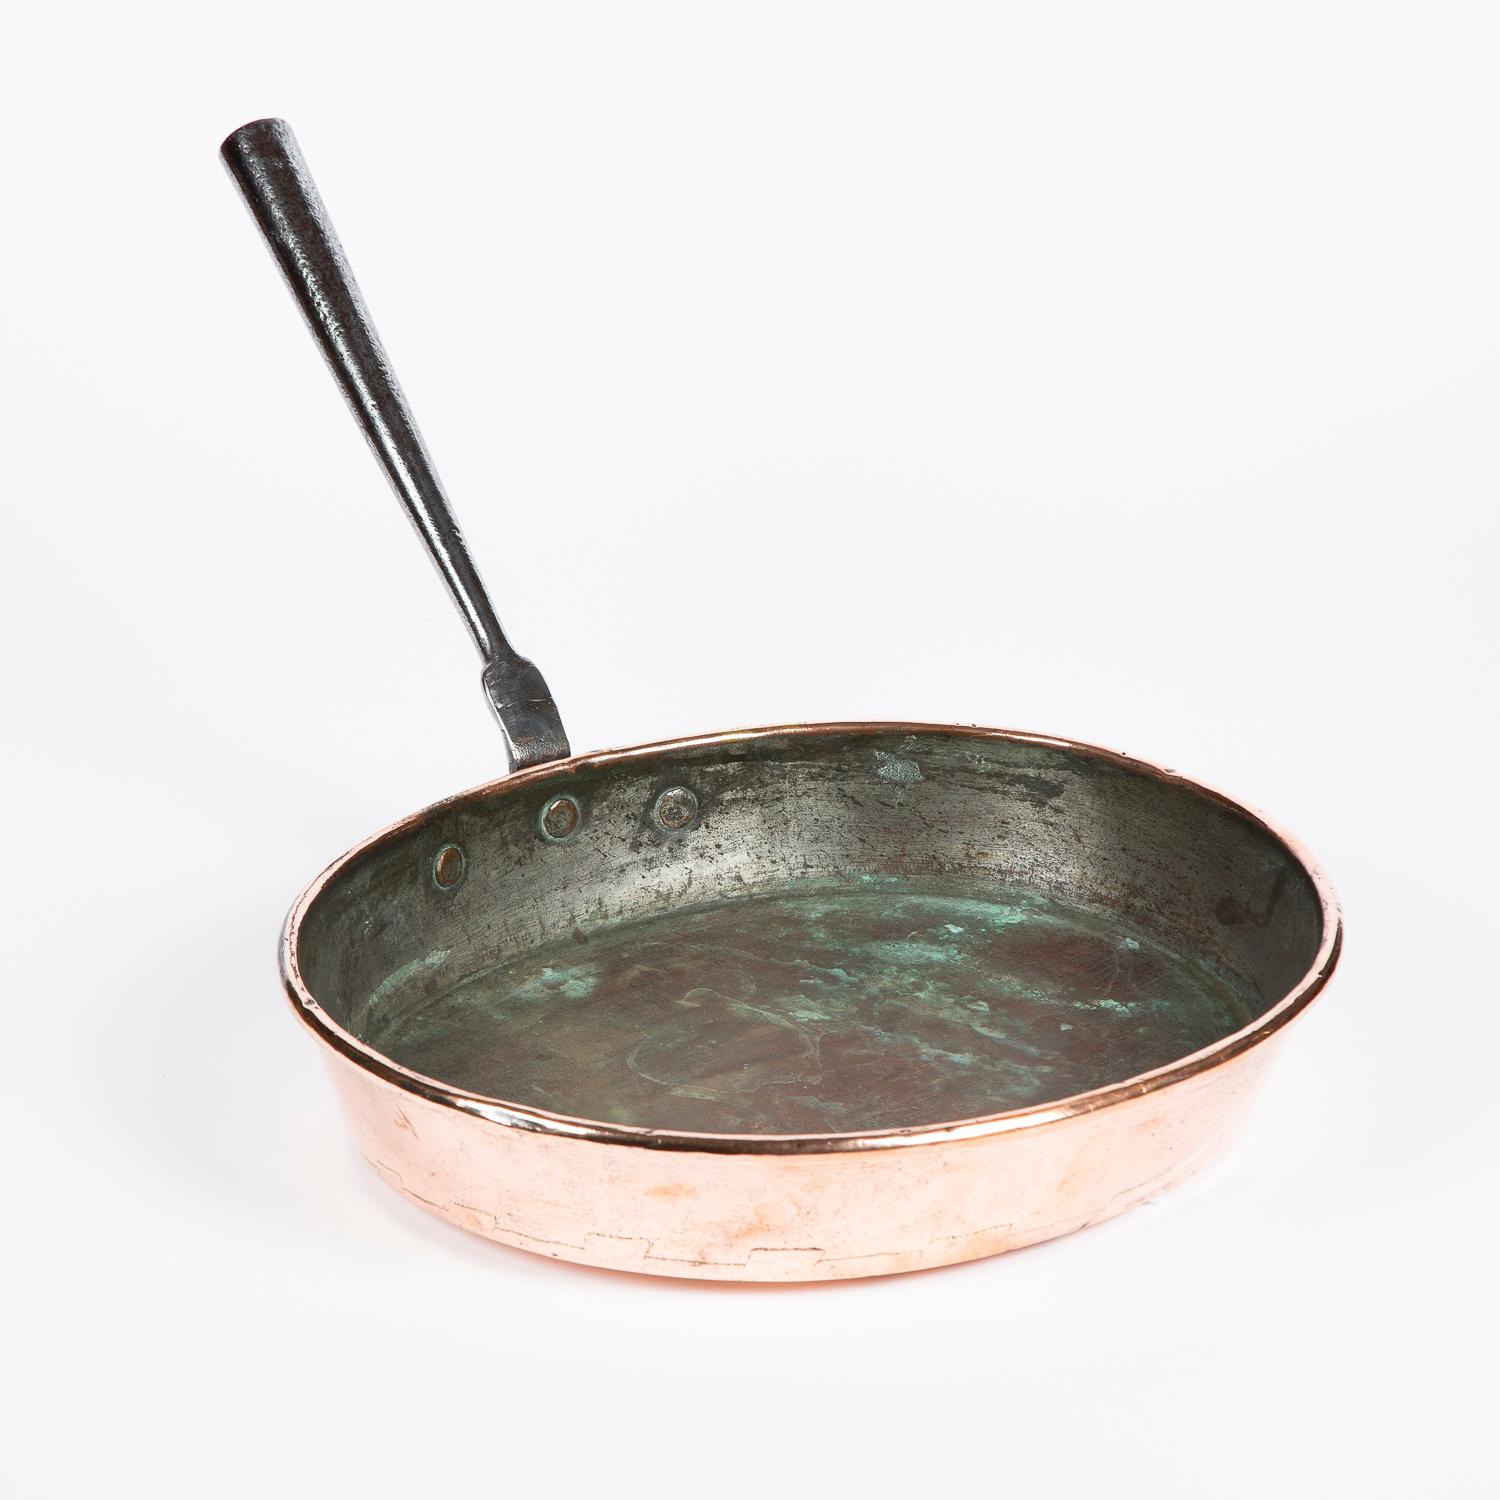 A large mid-19th century copper frying pan with riveted iron handle and seem base, circa 1860.

            